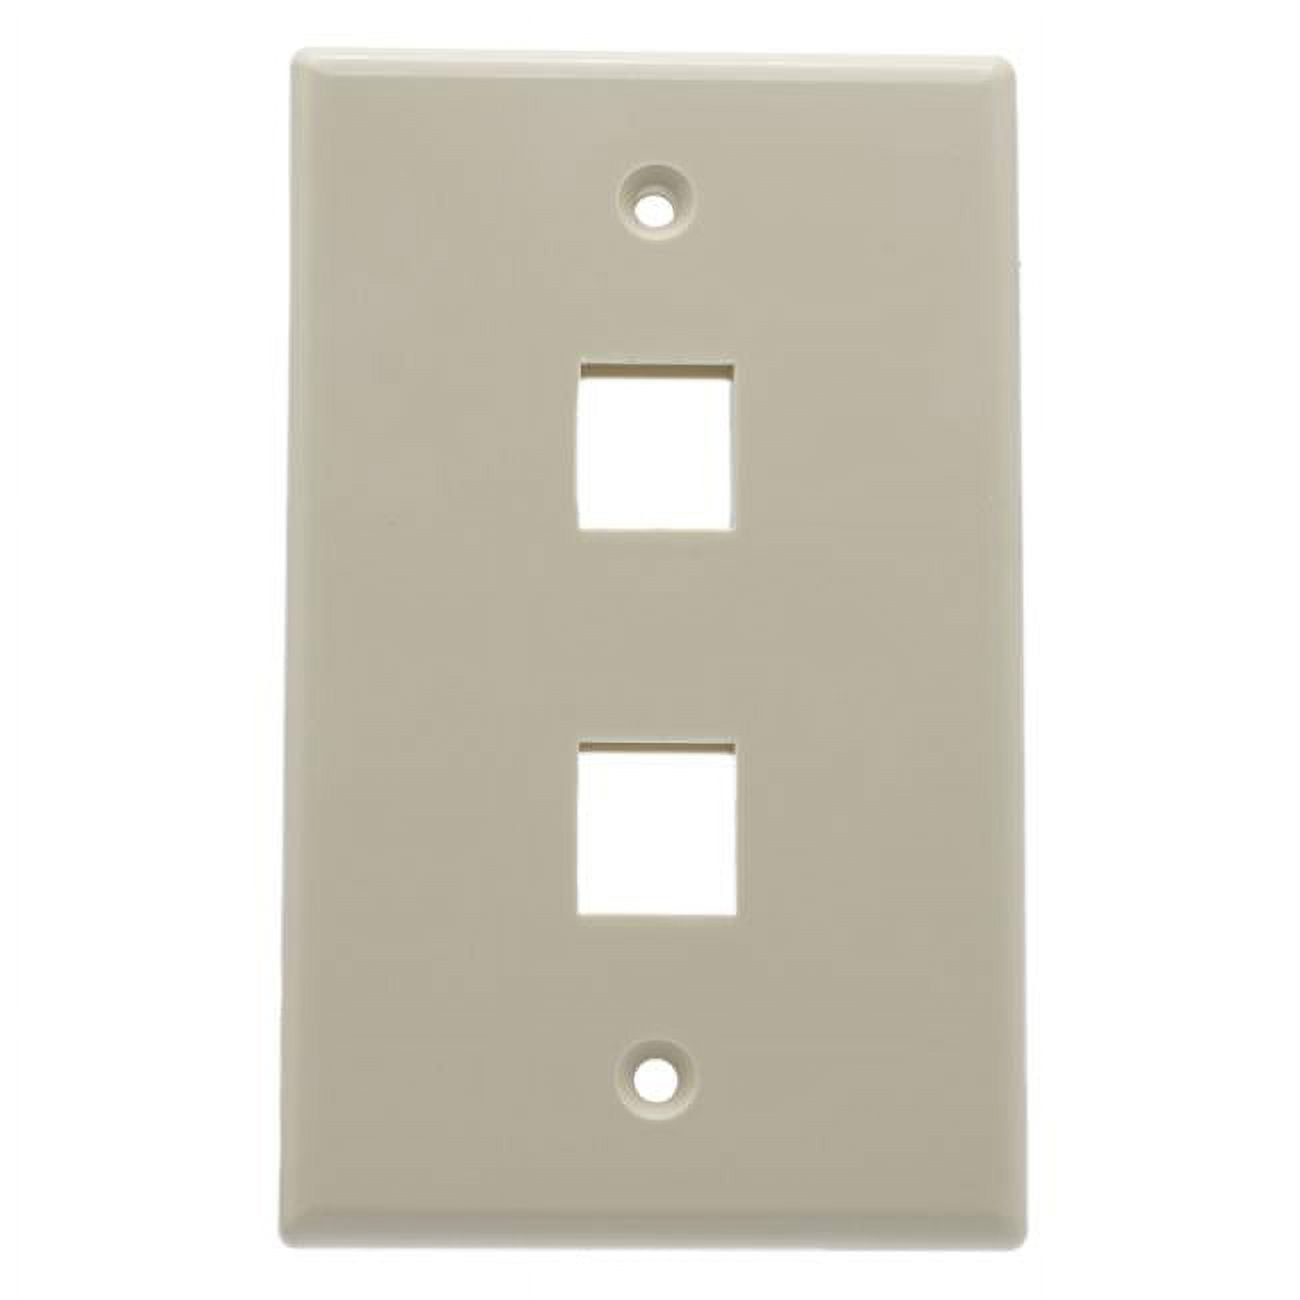 Picture of CableWholesale 3012-09303 Keystone Single Gang 3 Port Wall Plate, Lite Almond